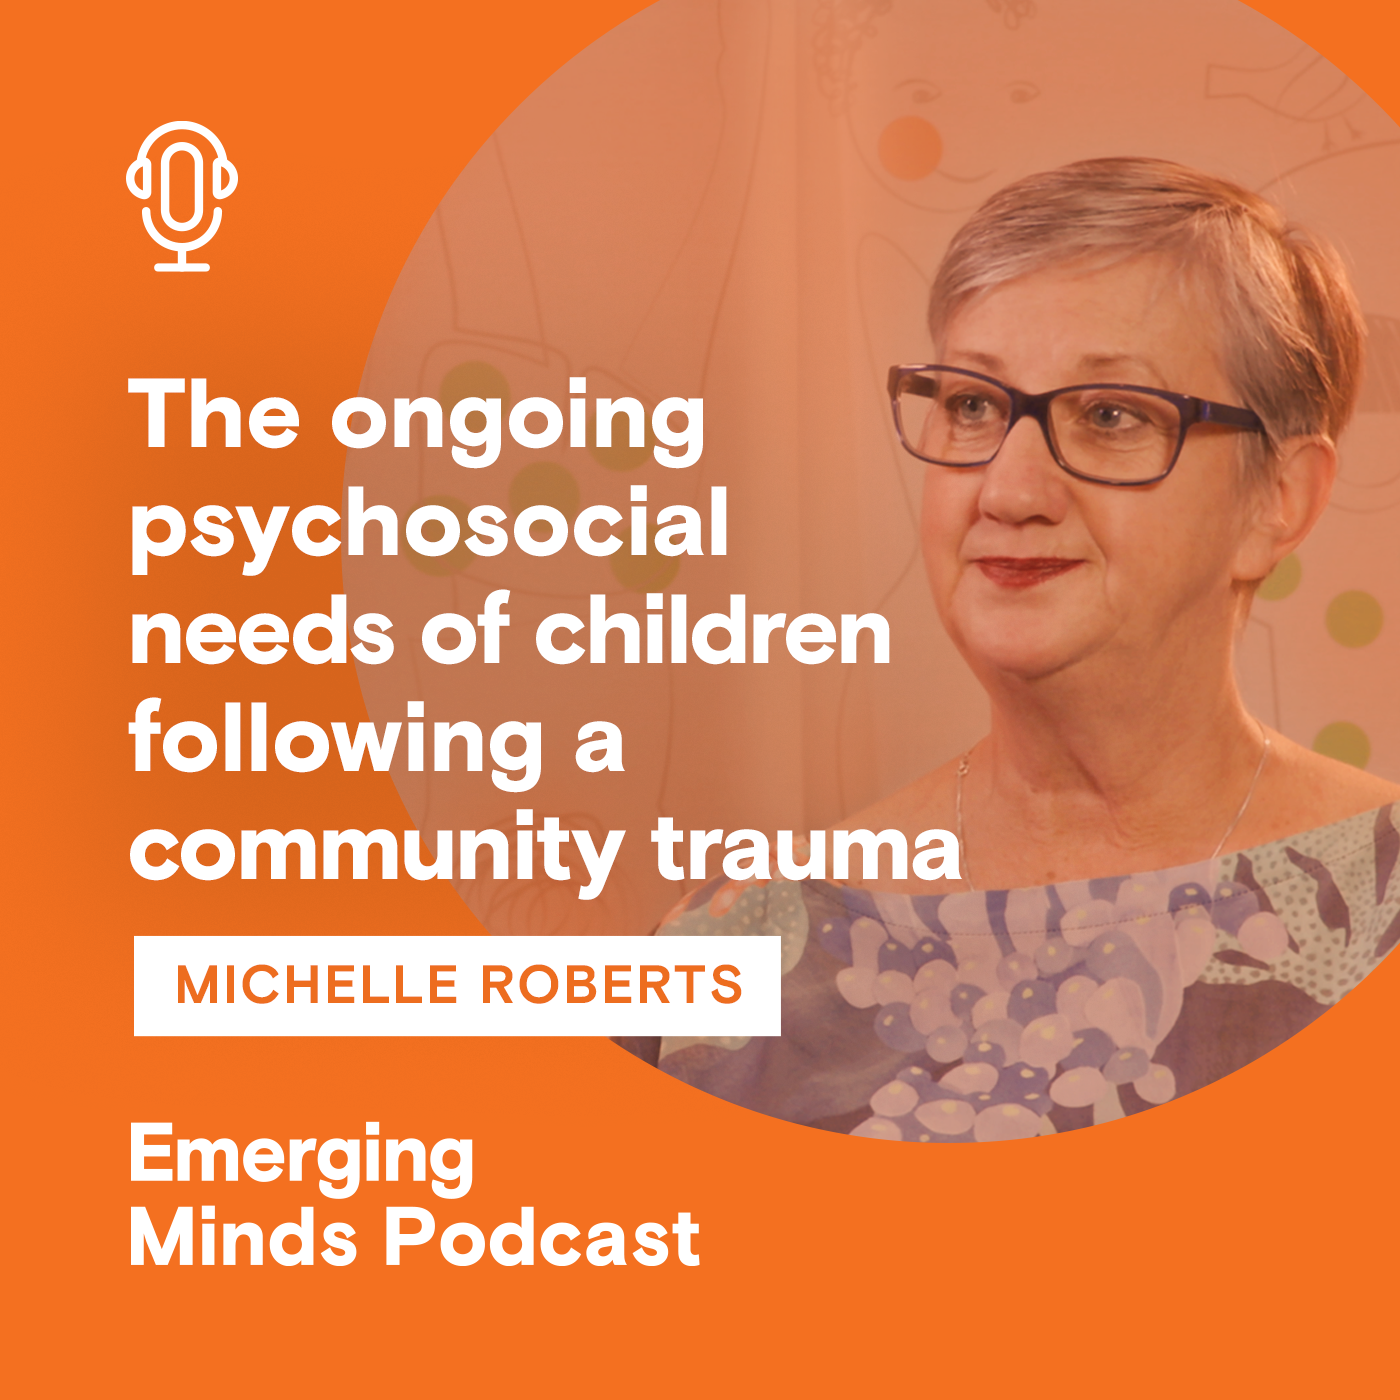 The ongoing psychosocial needs of children following a community trauma